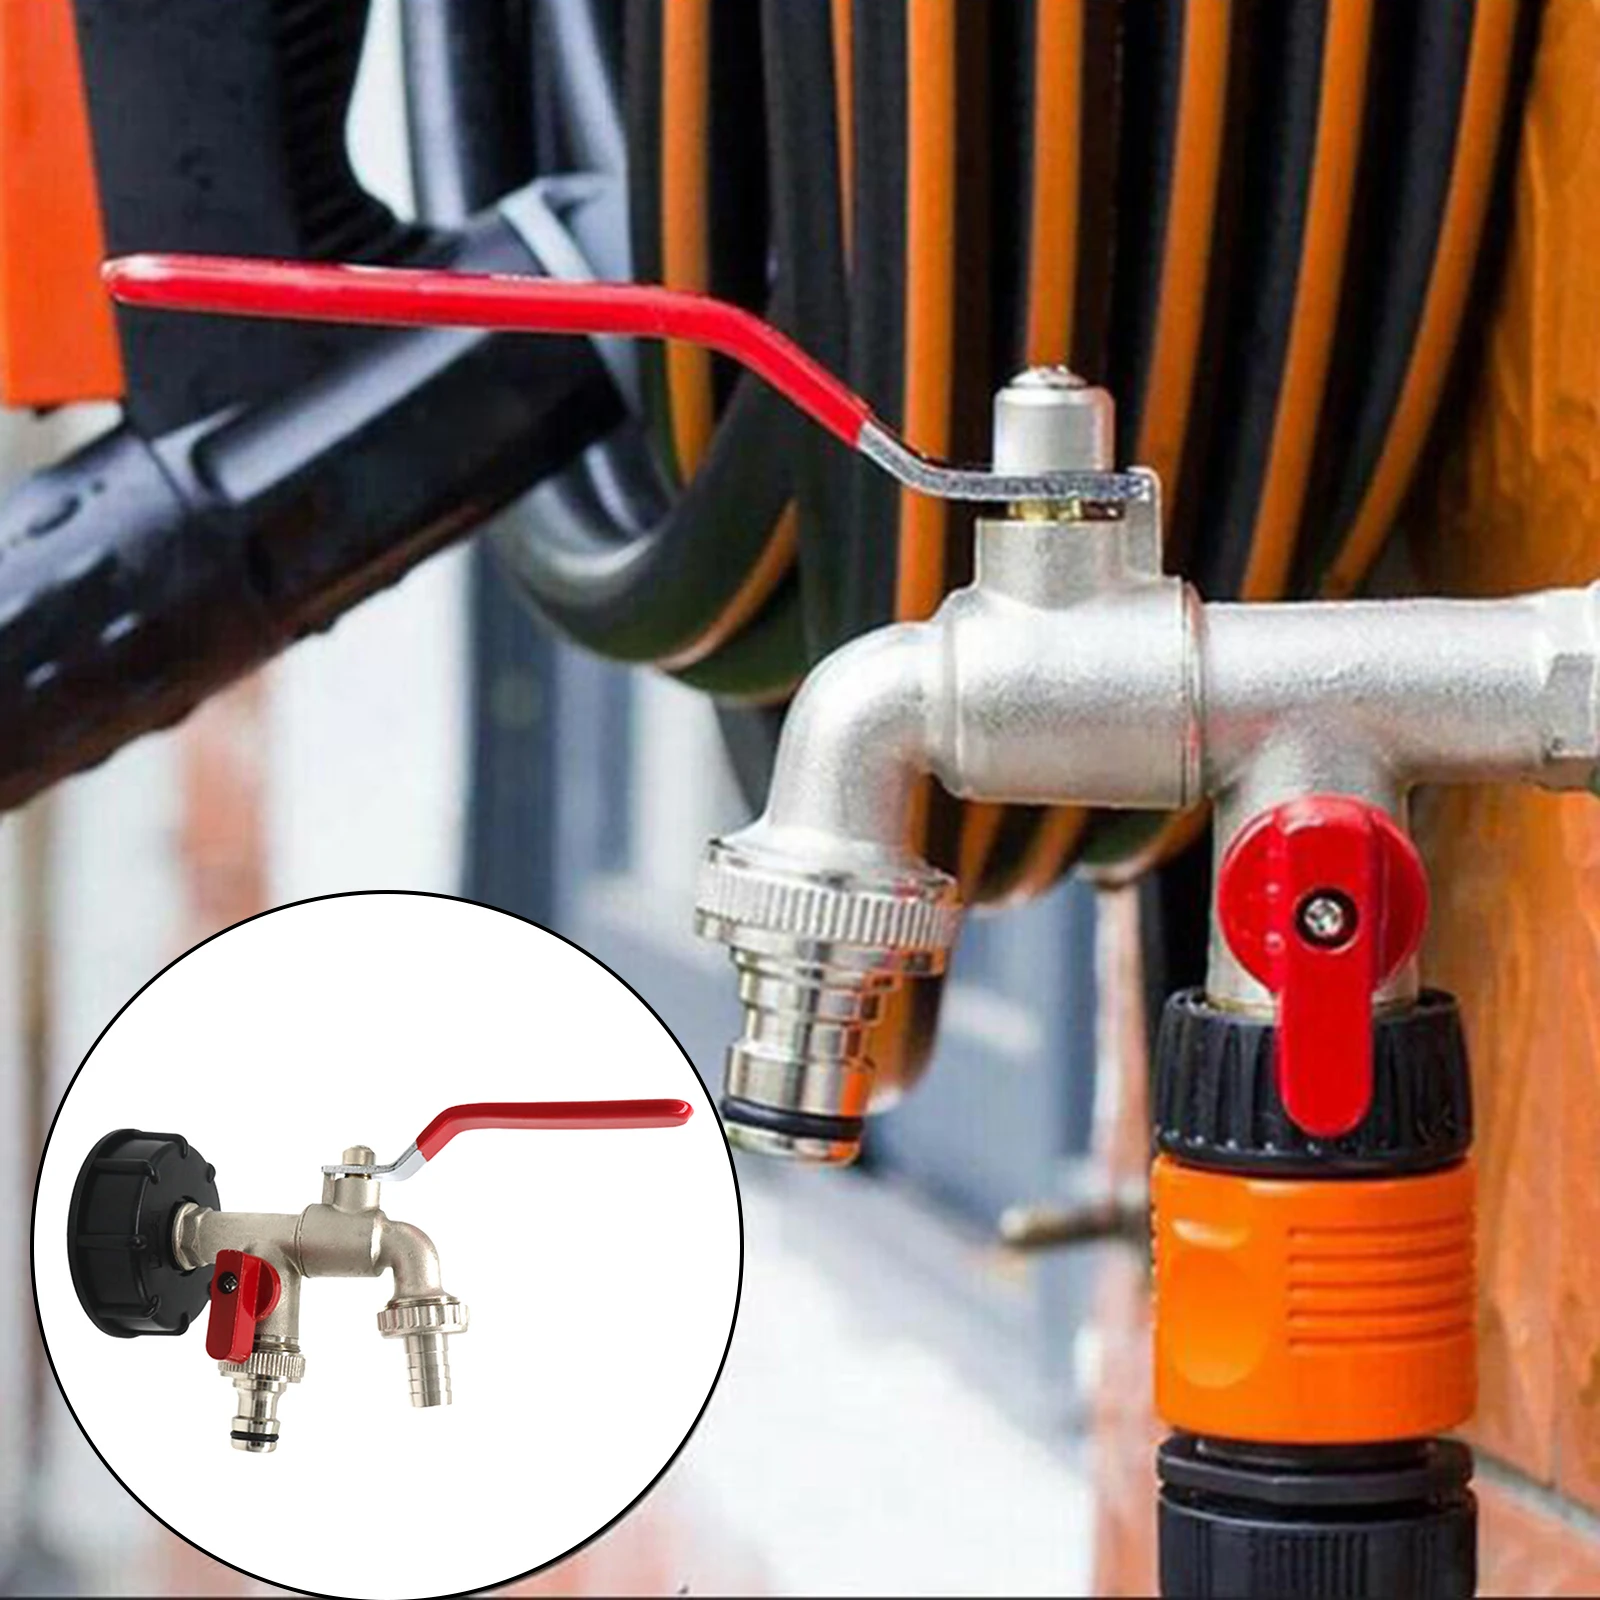 Garden IBC Tank Adapter Hose Connector Fine Thread Water Faucet Ball Fitting Kit